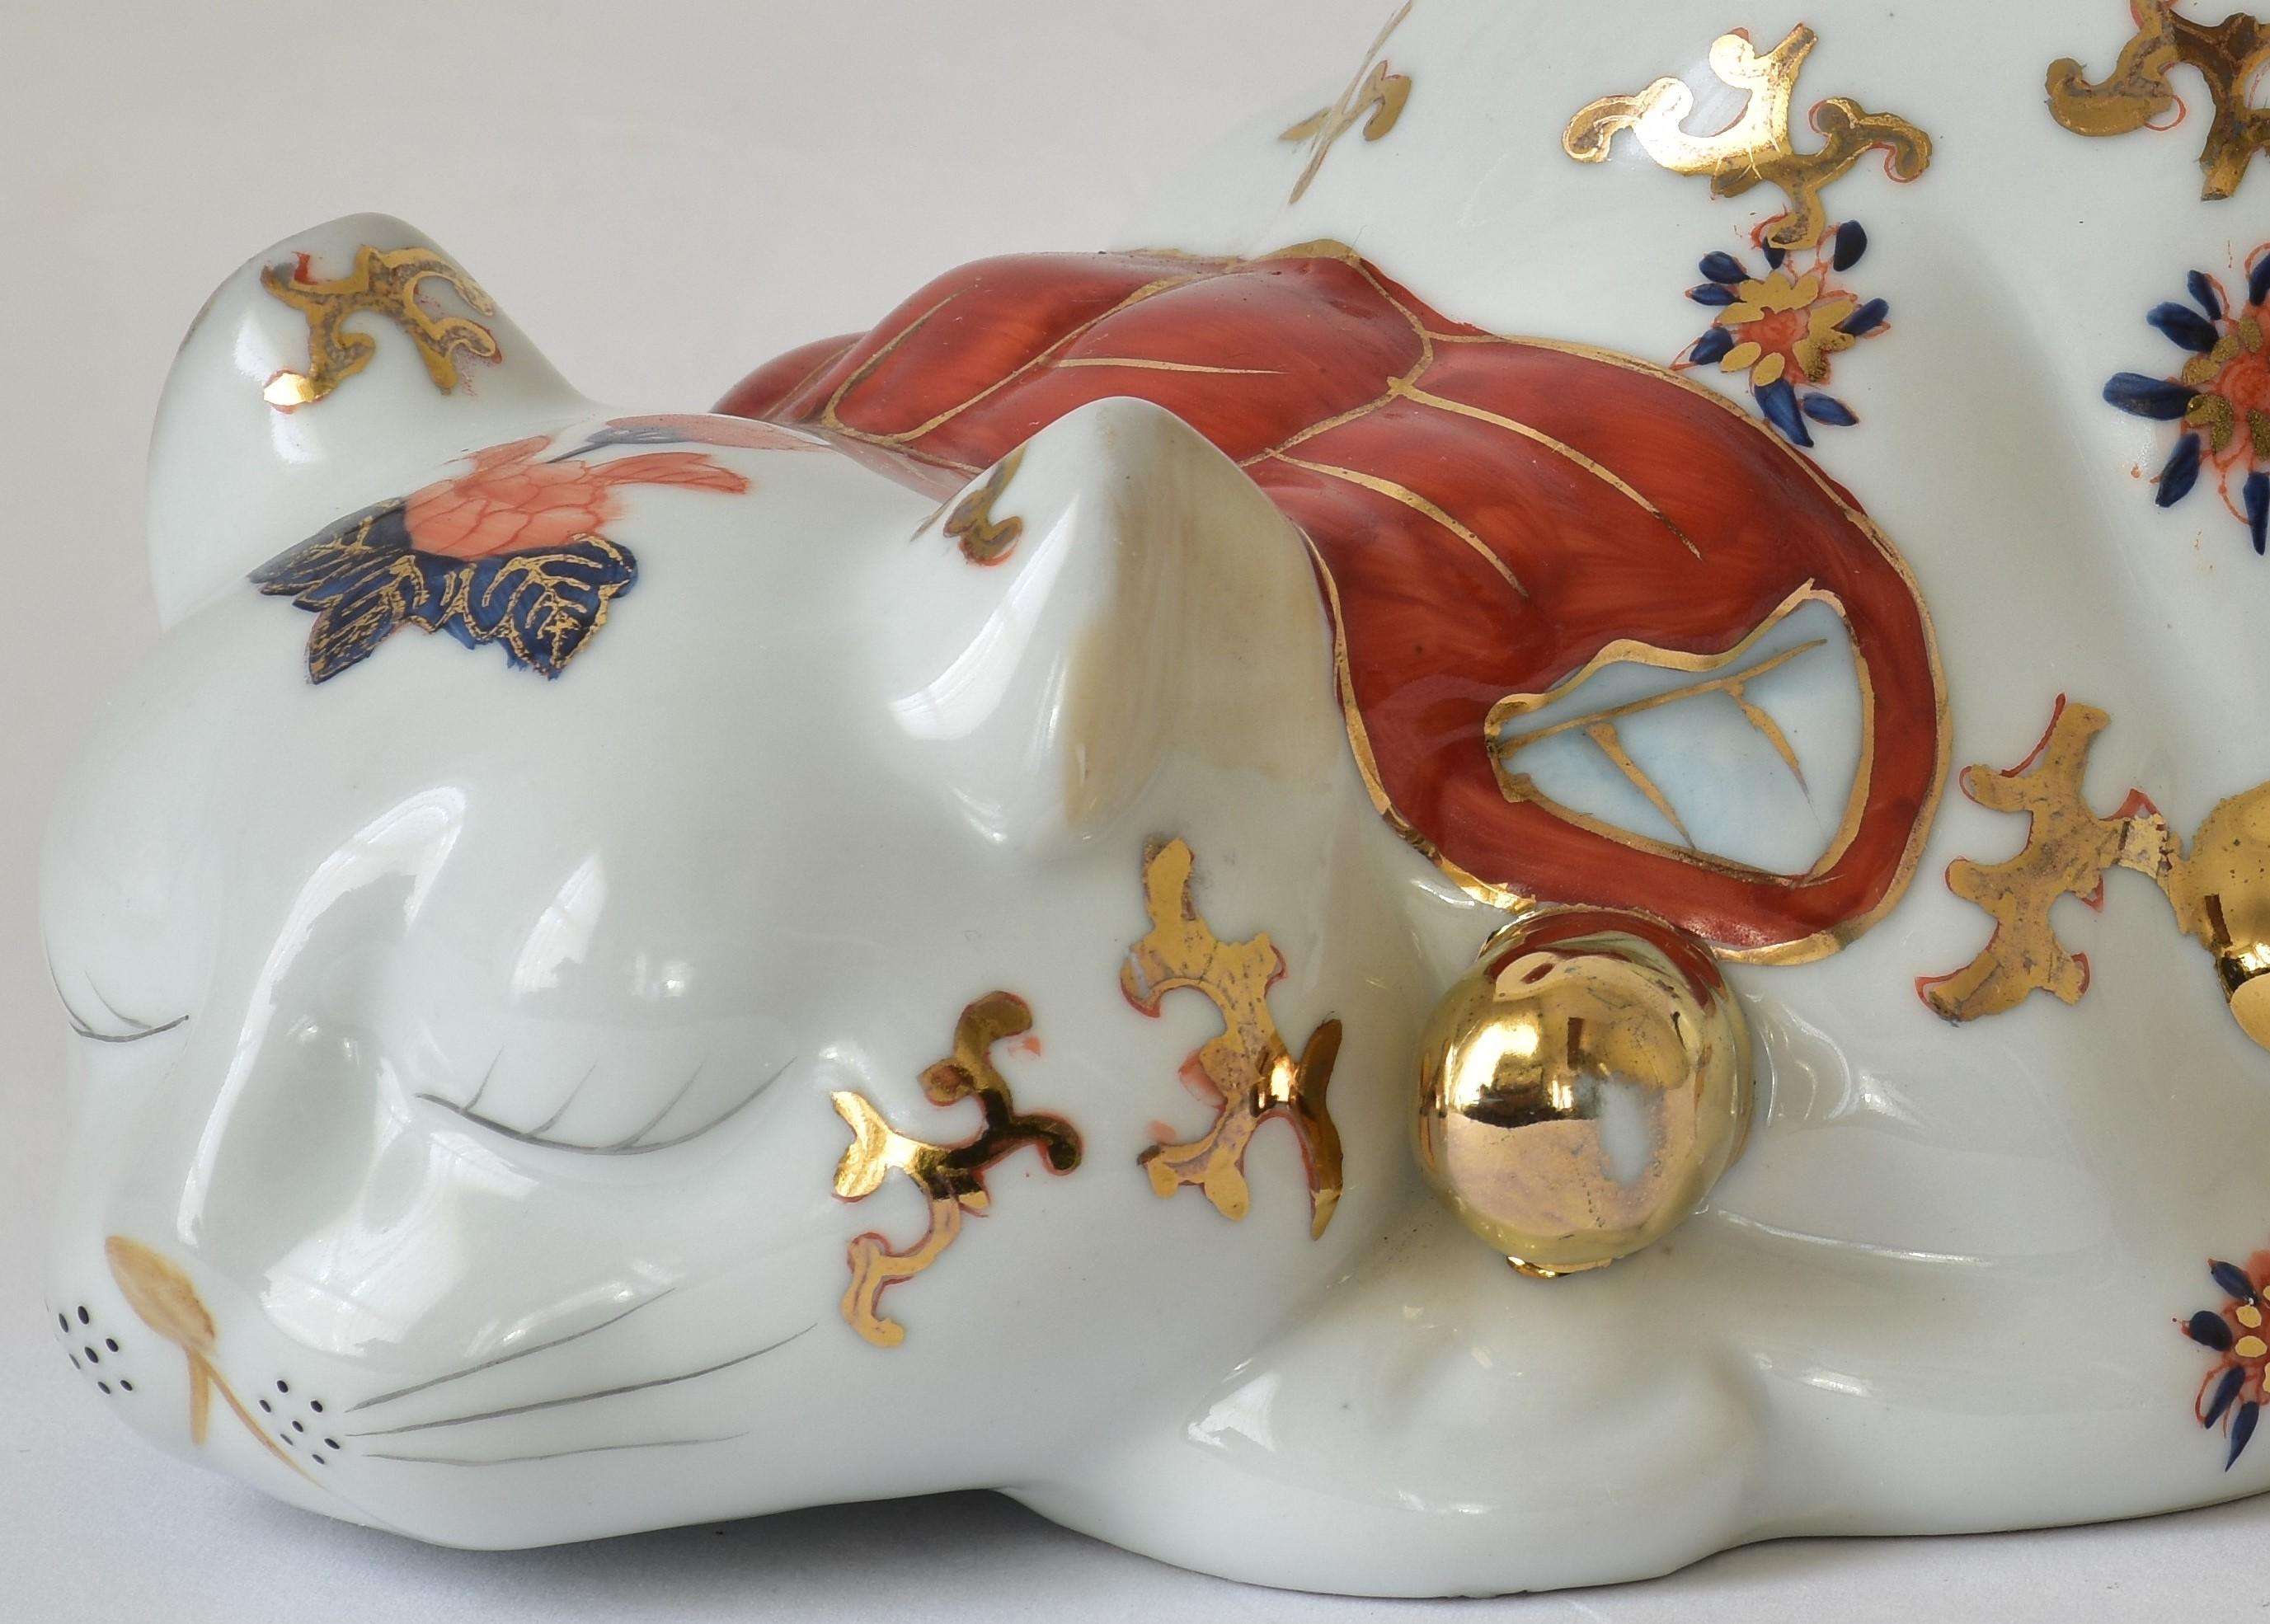 Charming Japanese porcelain sleeping cat from the second half of the 20th century, inspired by the small wooden sculpture at the entrance of the mausoleum of the Tokugawa Shoguns in Nikko, Japan by the acclaimed sculpture sculptor and architect,